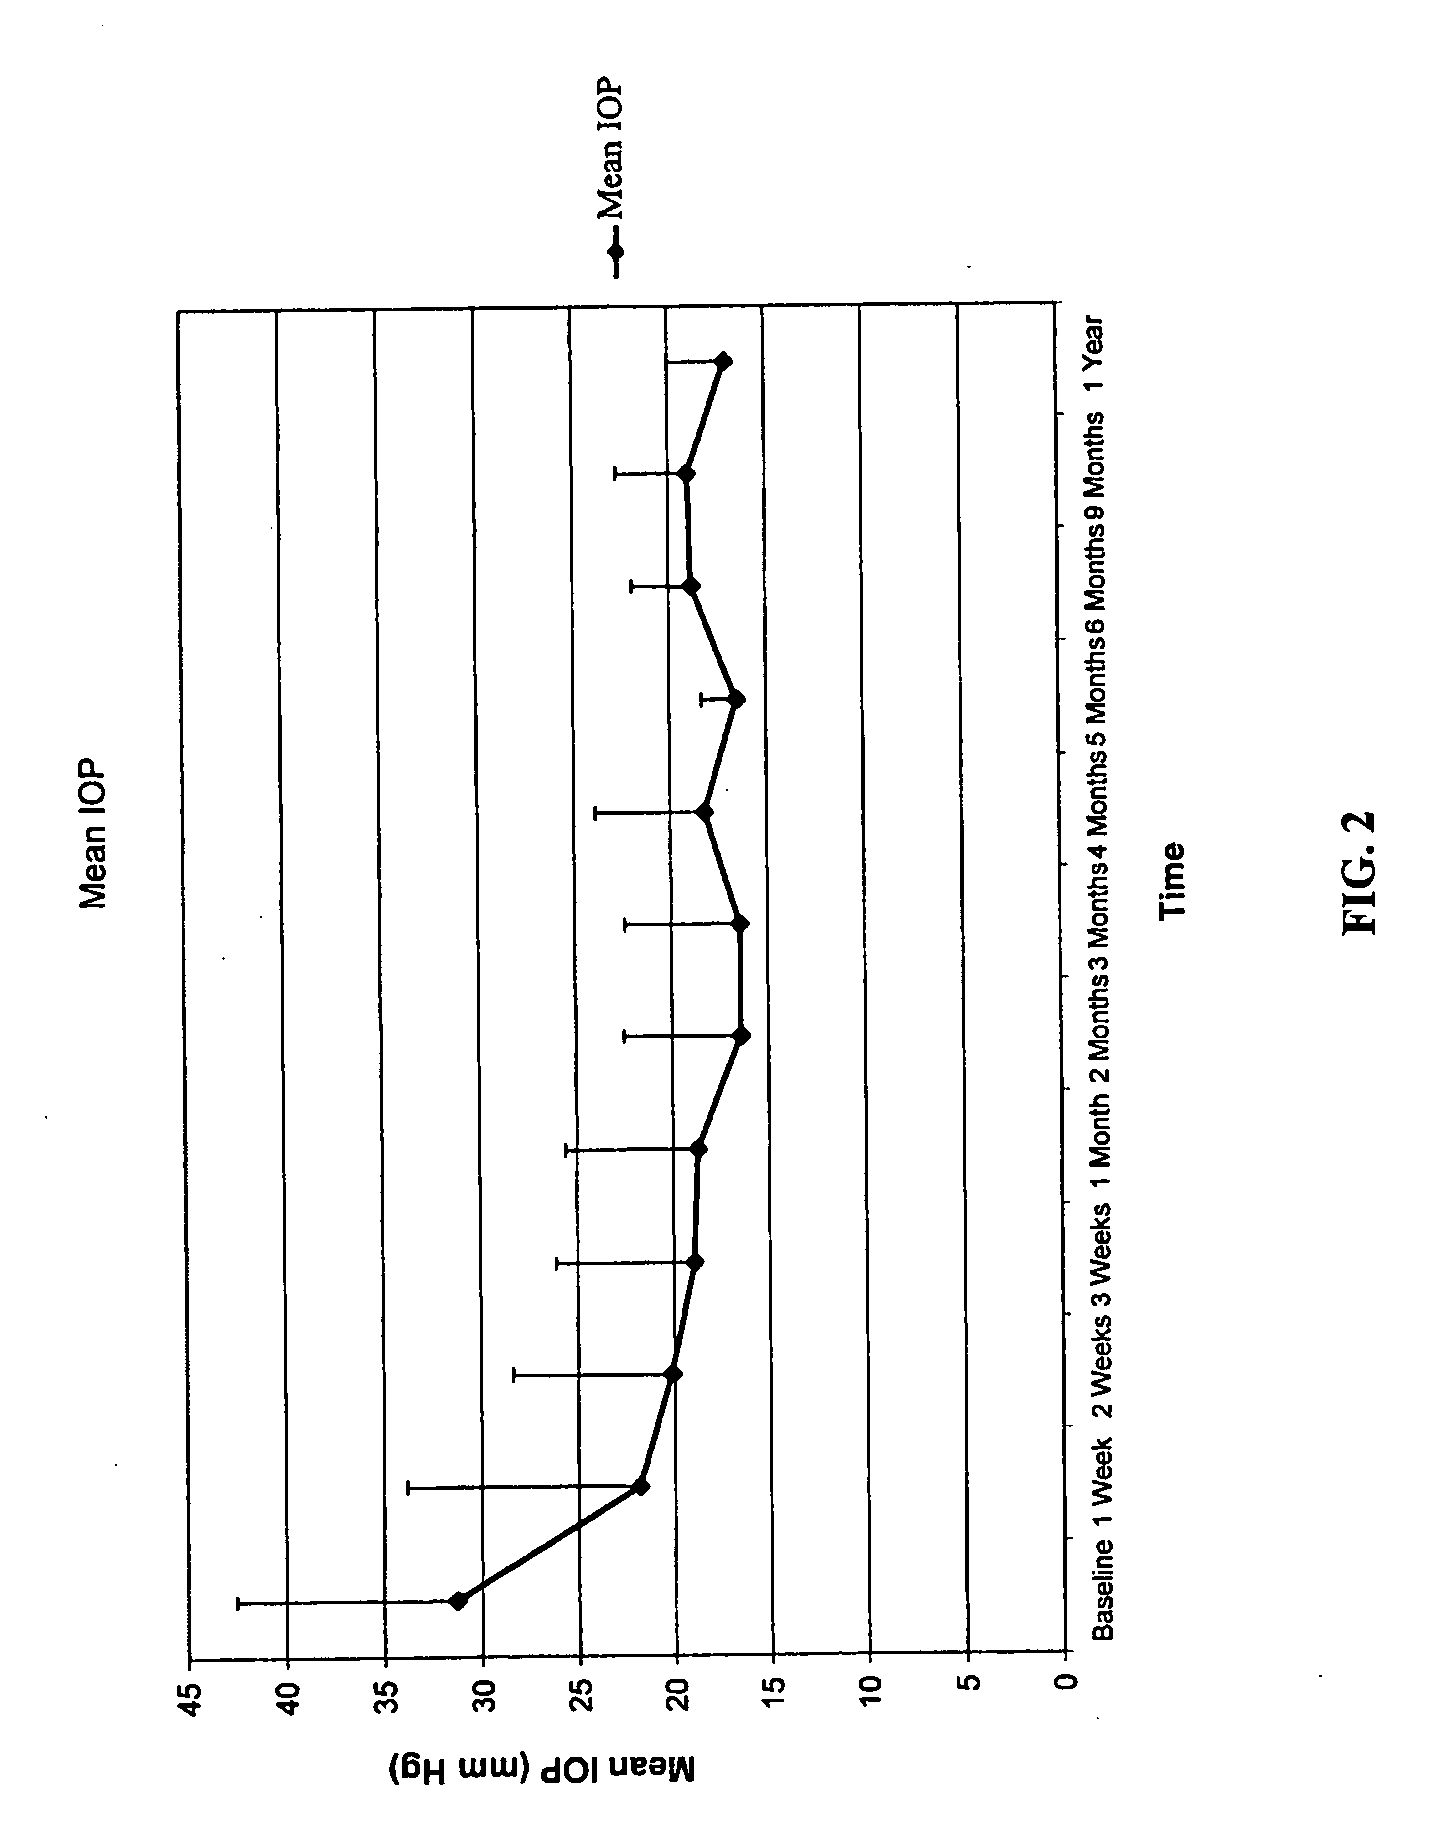 Method for Treating Primary and Secondary Forms of Glaucoma